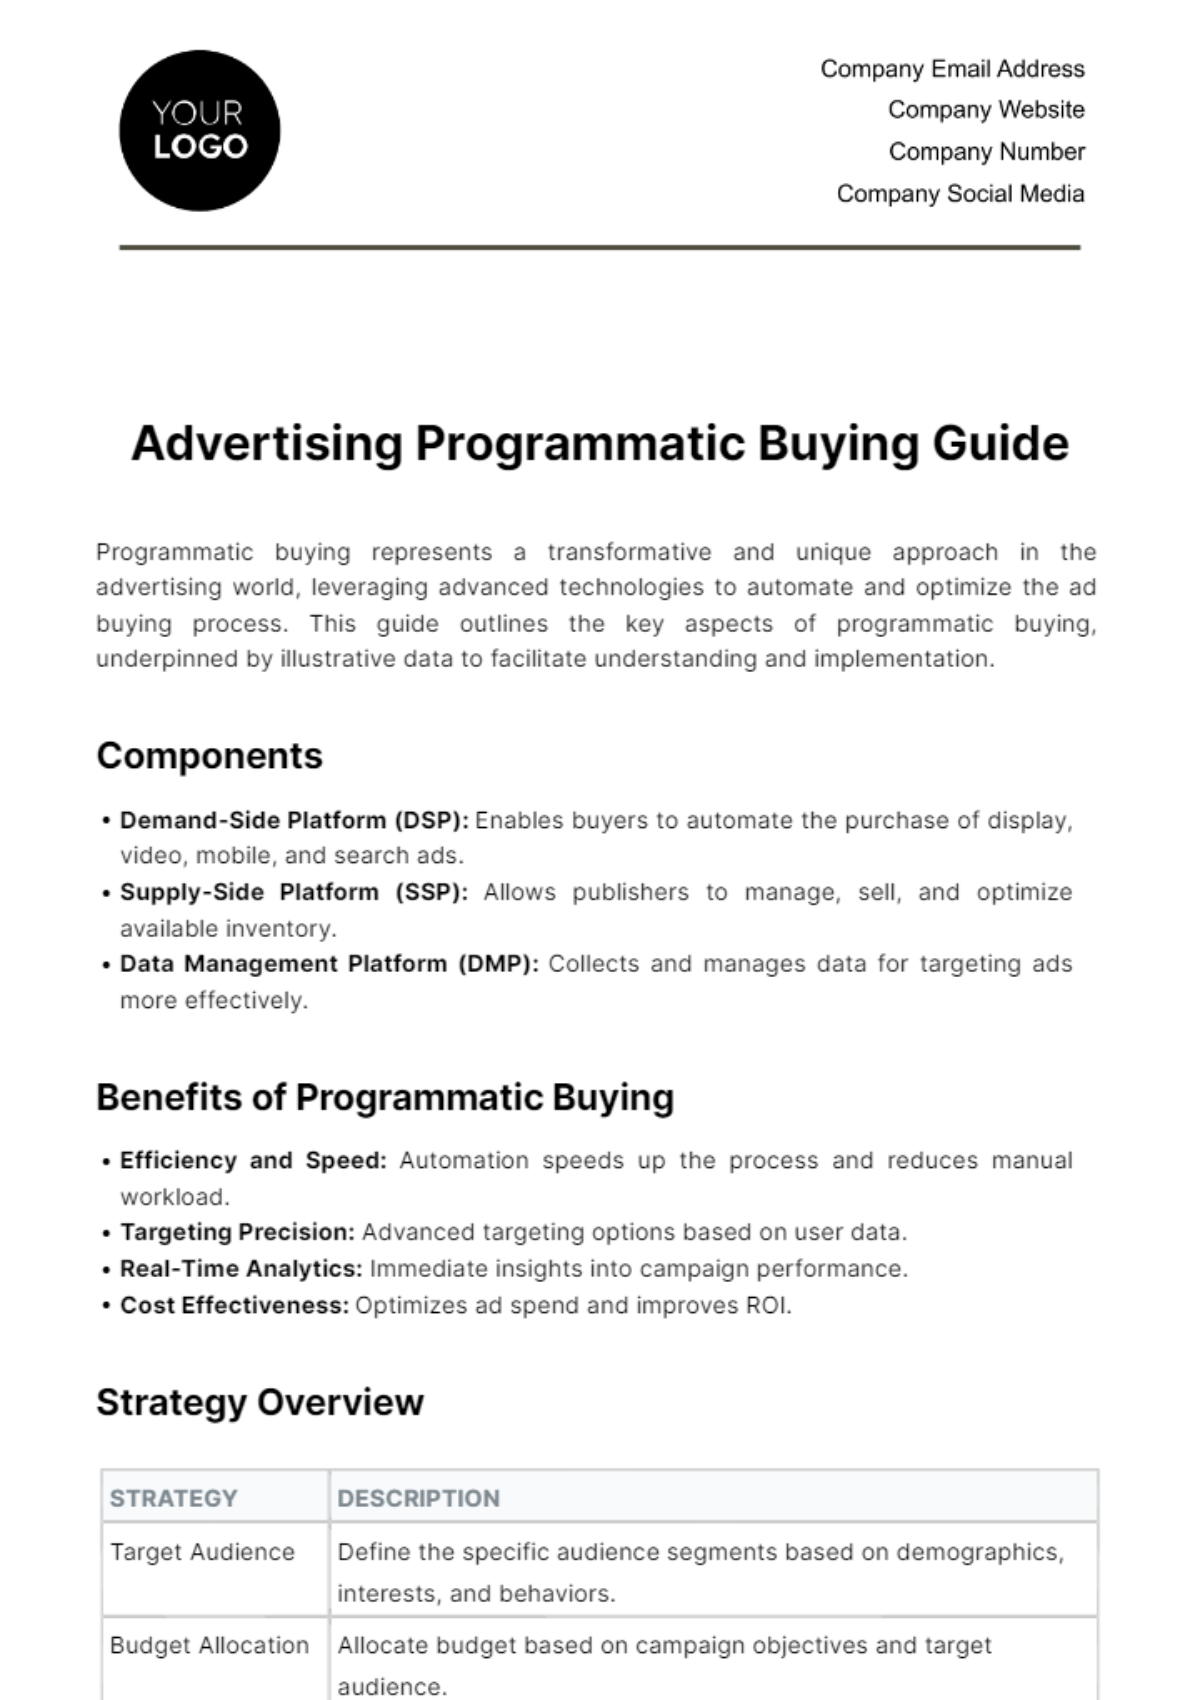 Advertising Programmatic Buying Guide Template